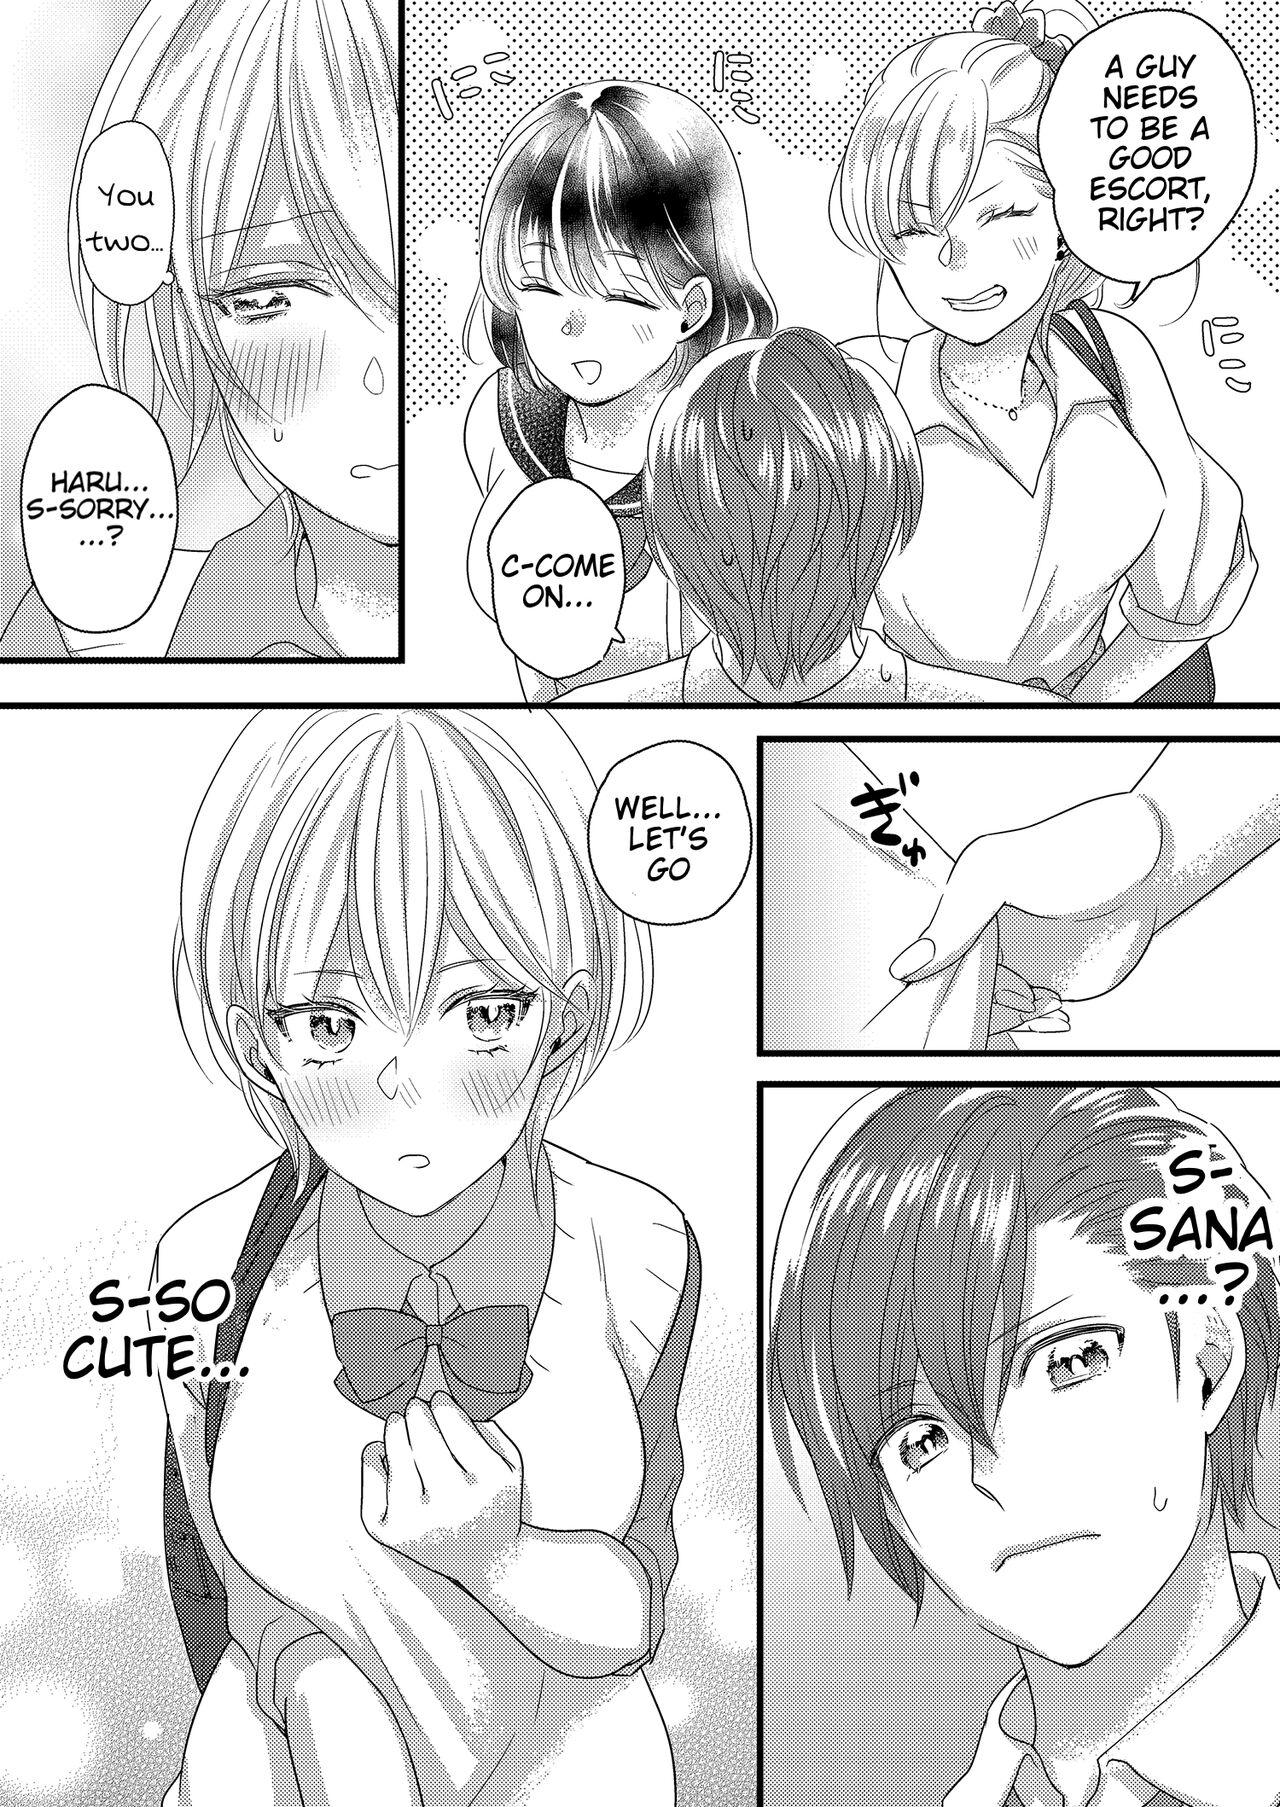 Perverted Haru and Sana ～Love Connected Through Cosplay～ - Original Culo - Page 2